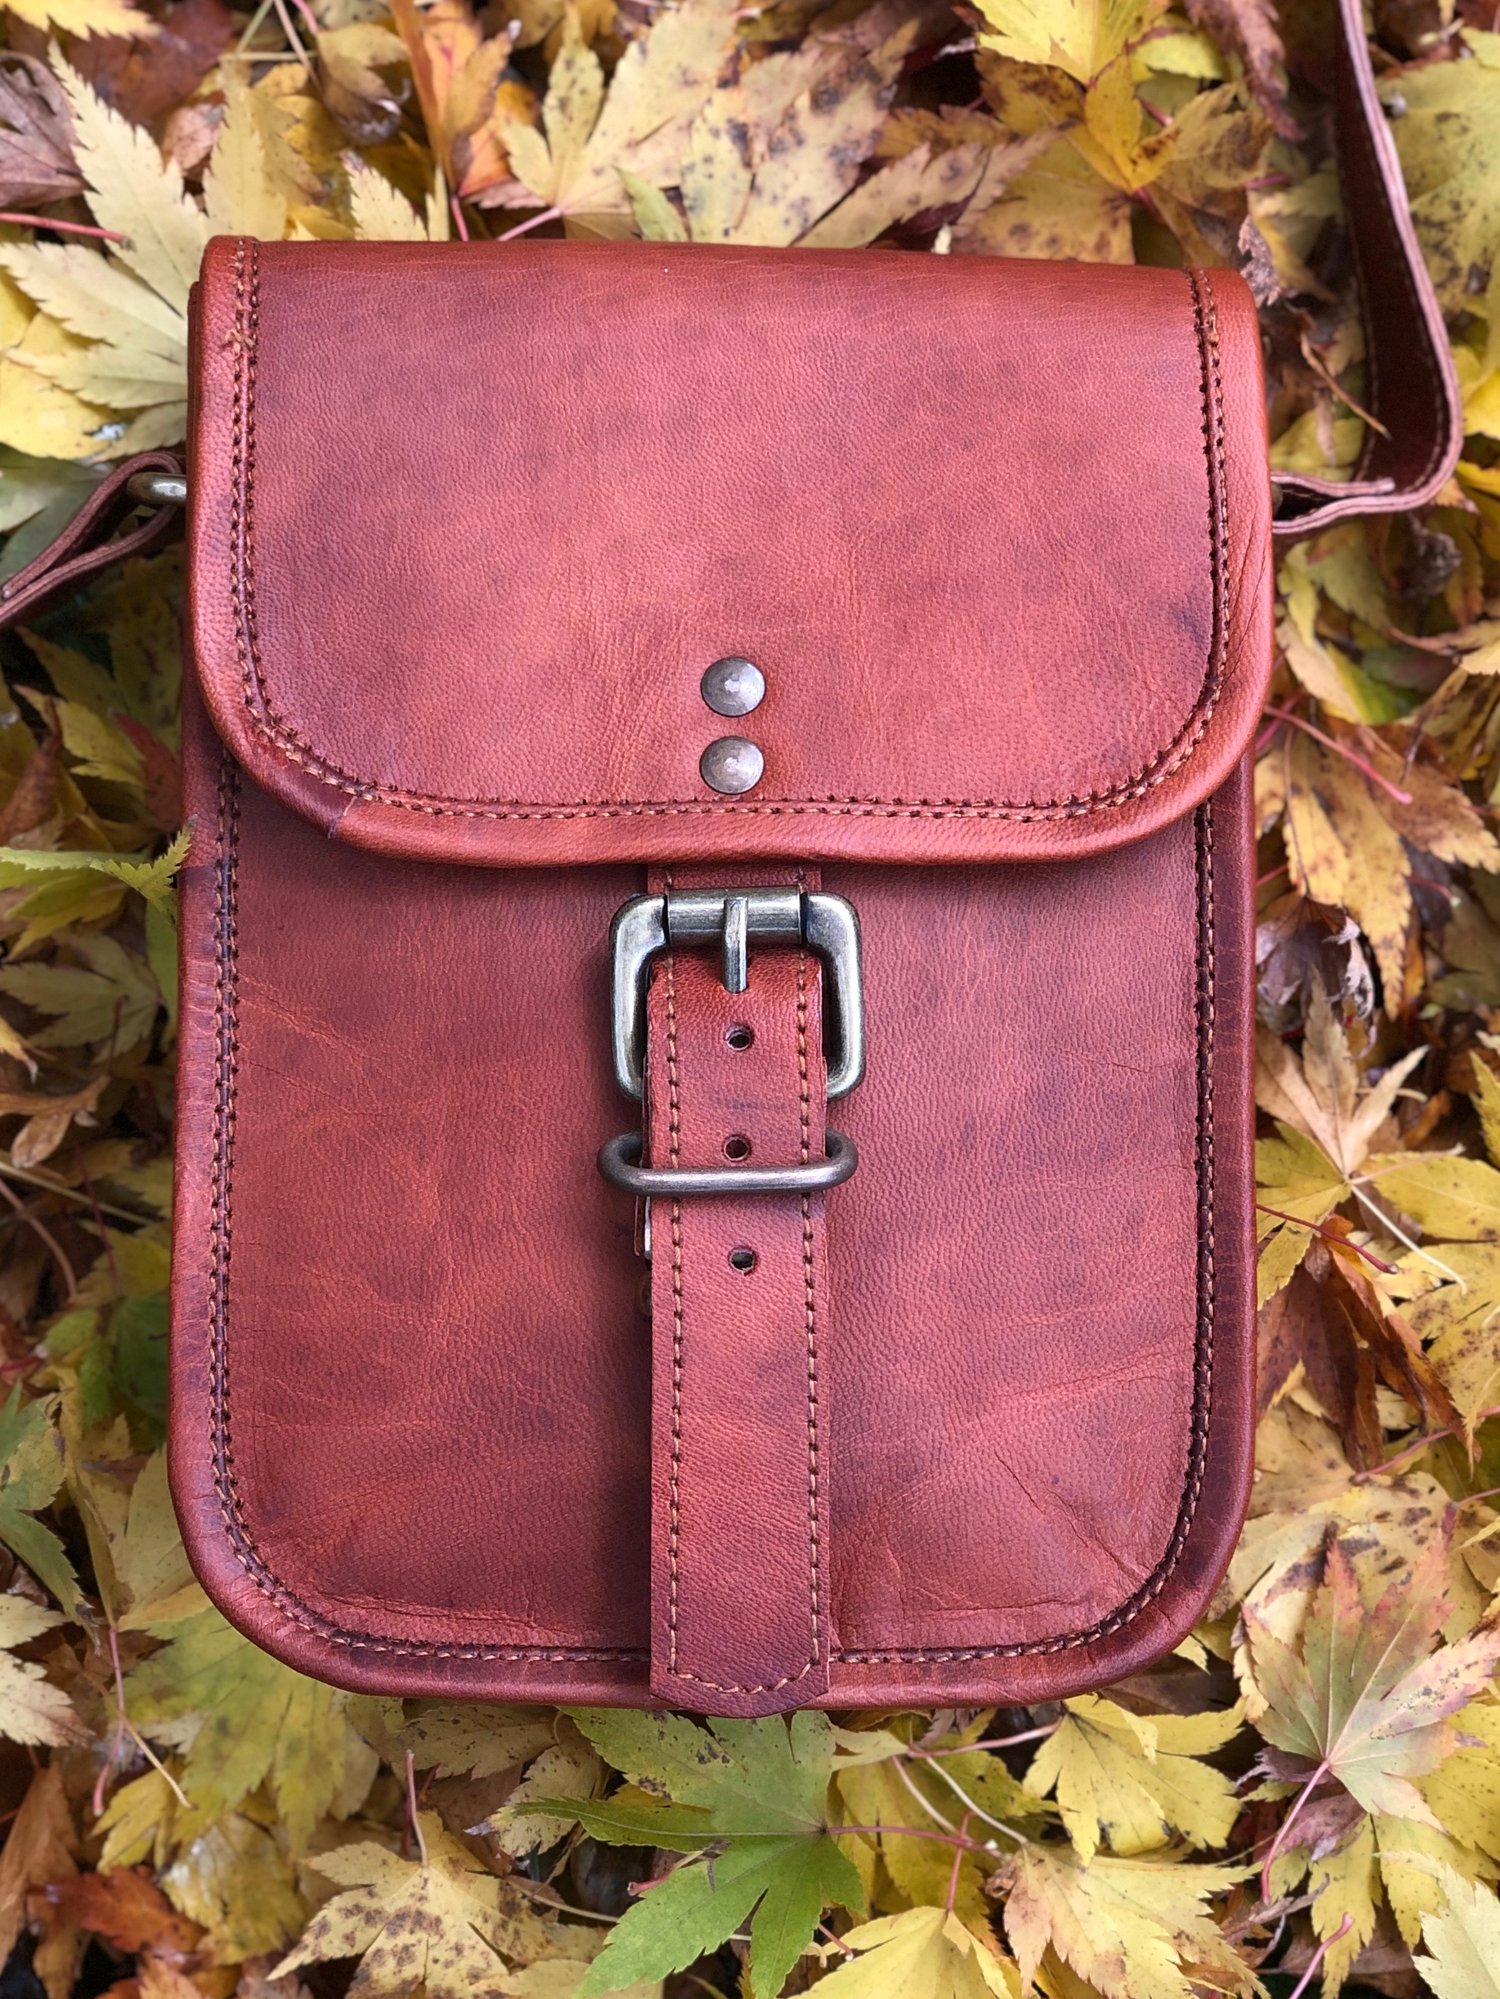 8”x6” Handmade Leather Shoulder/Camera Bag - rectangle | Beaumont Bags